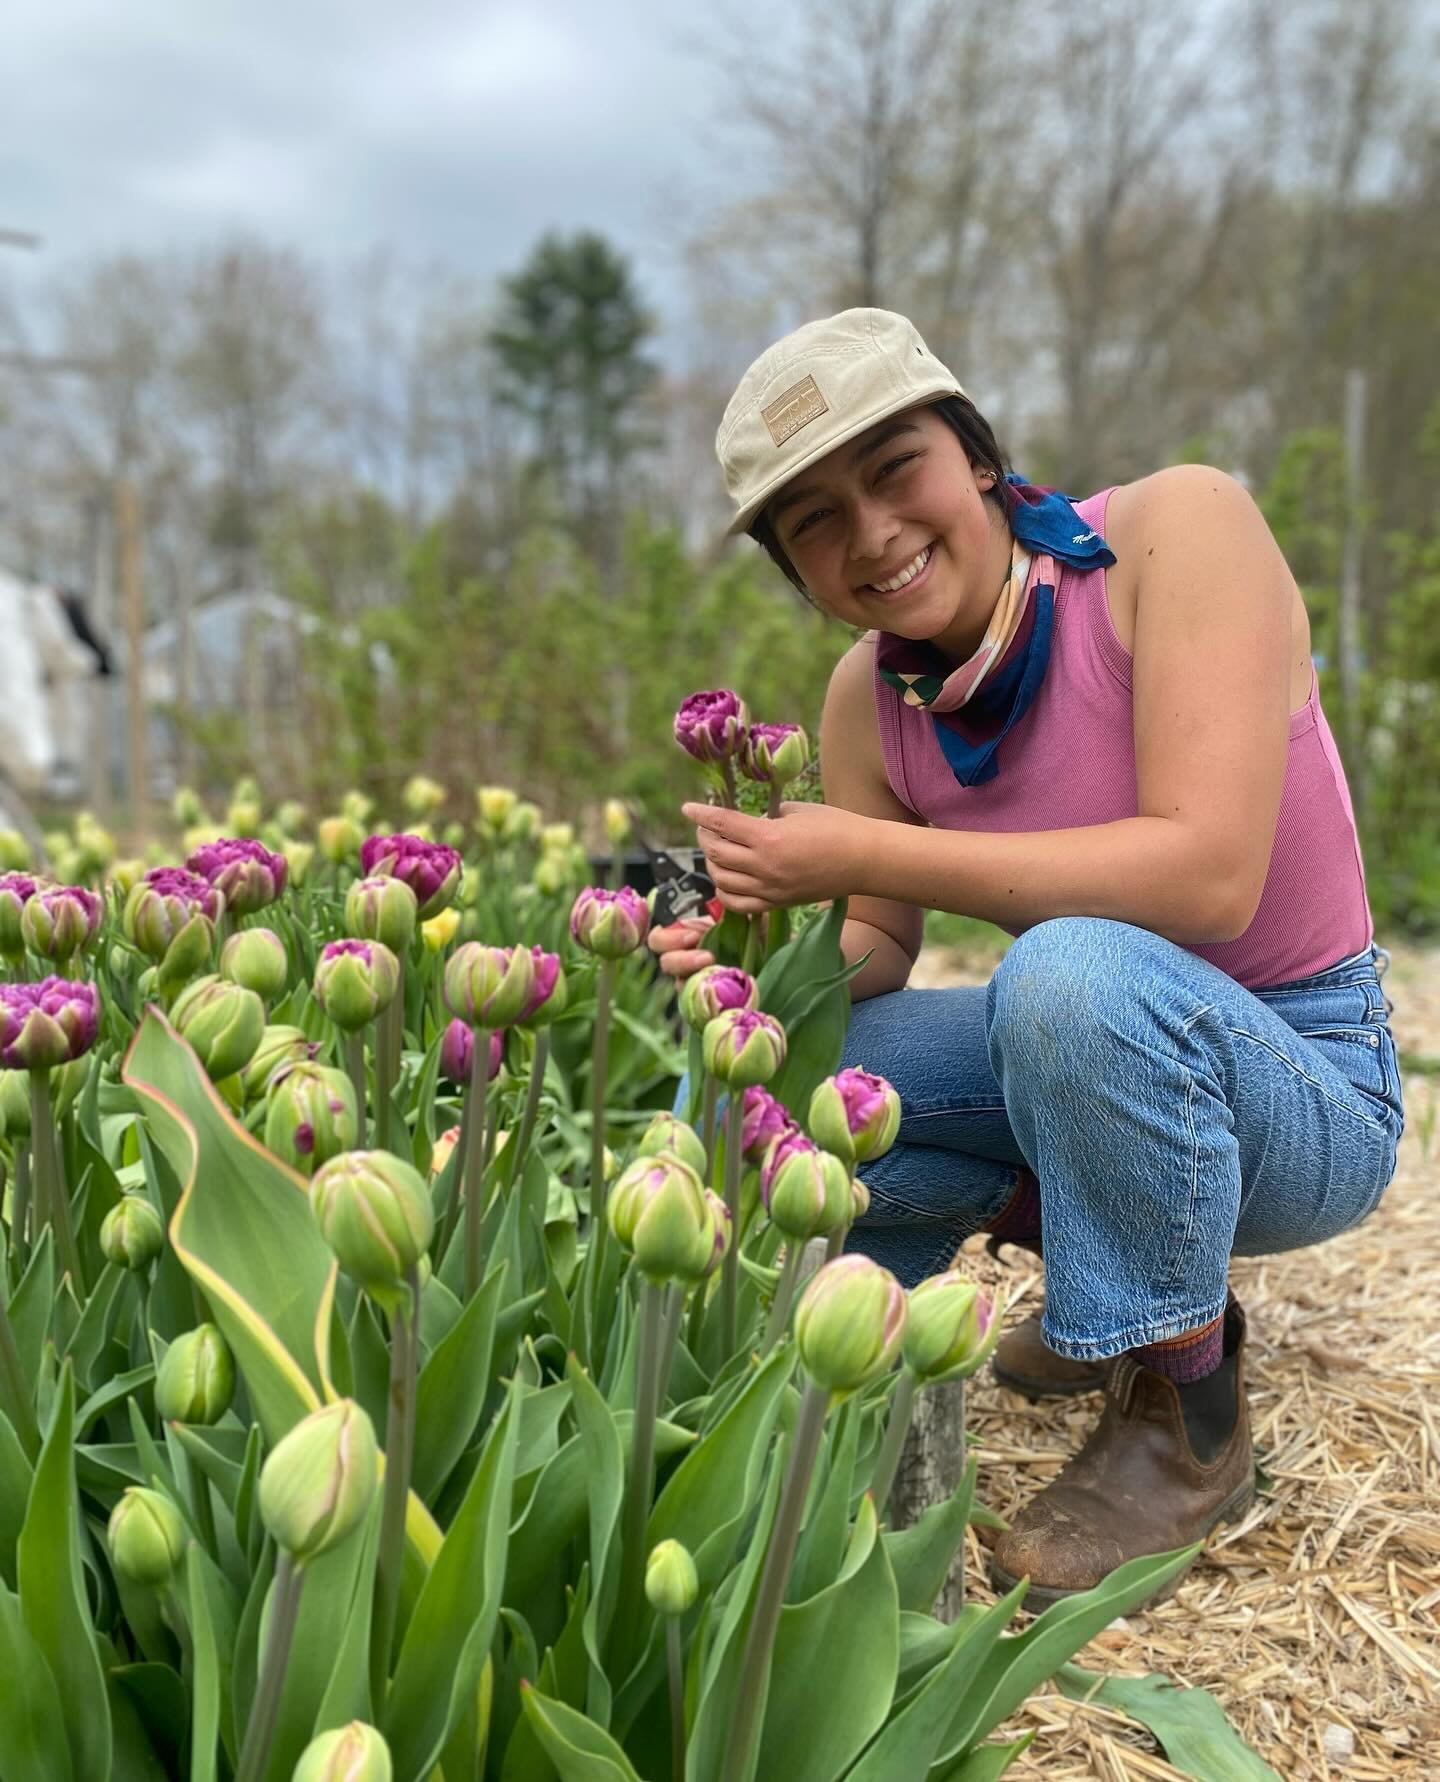 It&rsquo;s Kate&rsquo;s last day. We will miss her. She got so much done and learned a lot (we hope) at @veggiestotable &hellip; from weeding, mulching, seeding and planting to picking tulips, packing dahlias and making #flowerbouquets to donate. Ty 